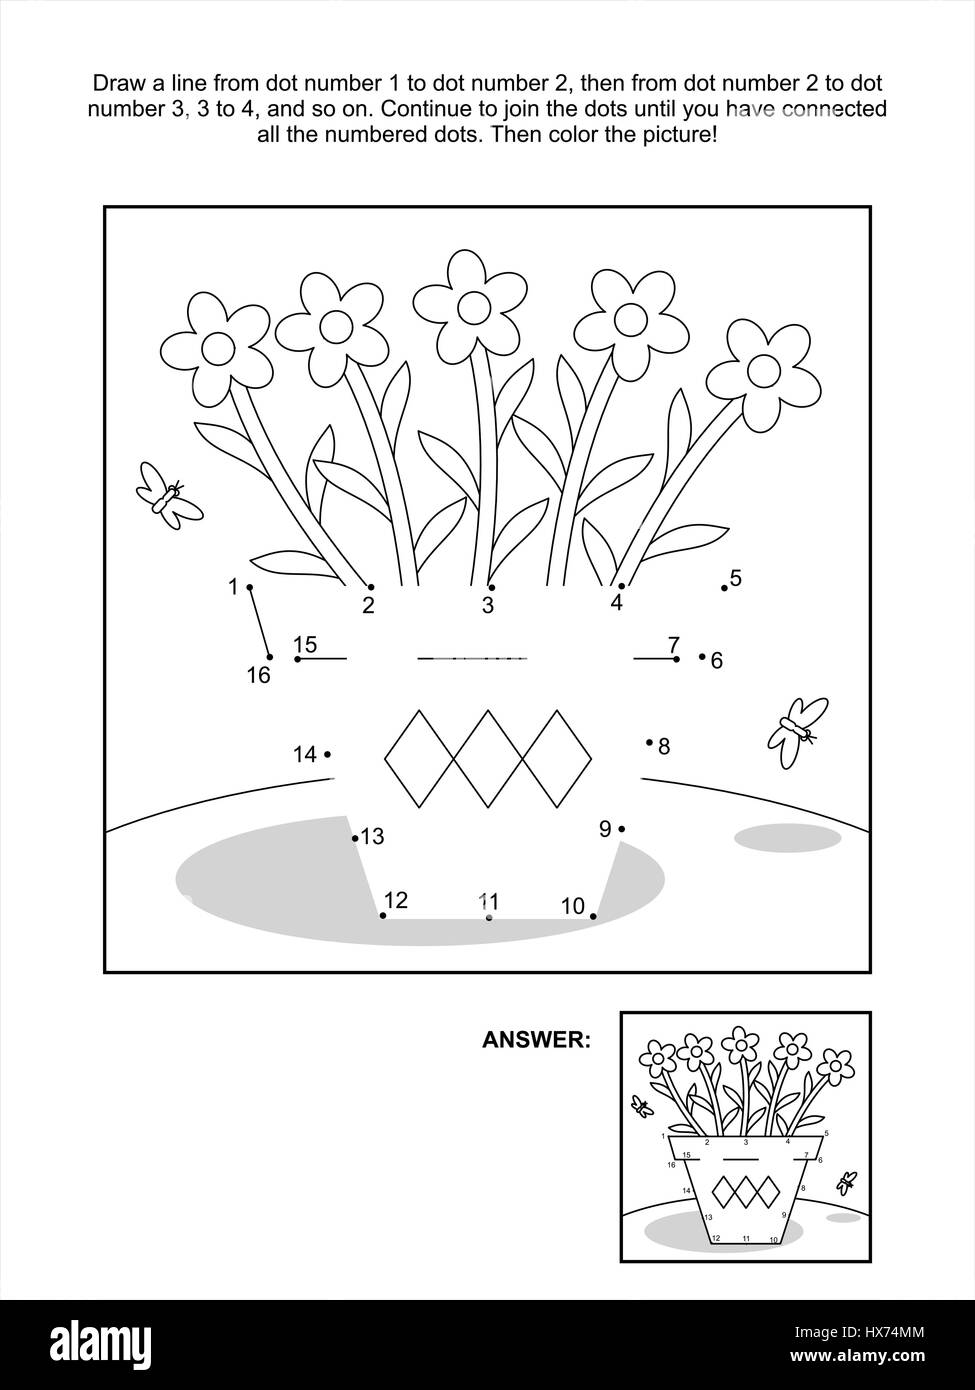 Connect the dots picture puzzle and coloring page